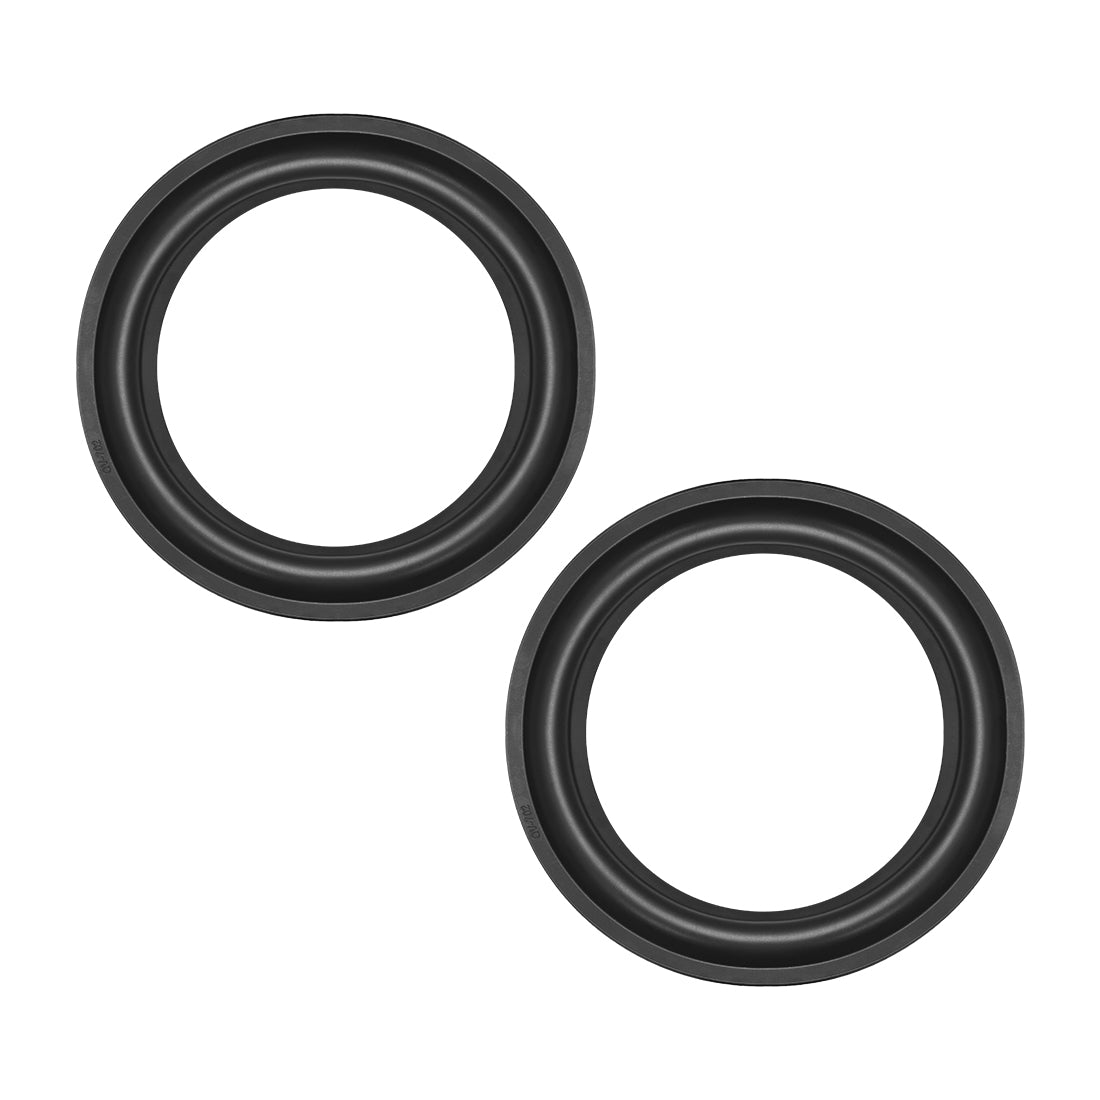 uxcell Uxcell 7" 7inch Speaker Rubber Edge Surround Rings Replacement Part for Speaker Repair or DIY 2pcs